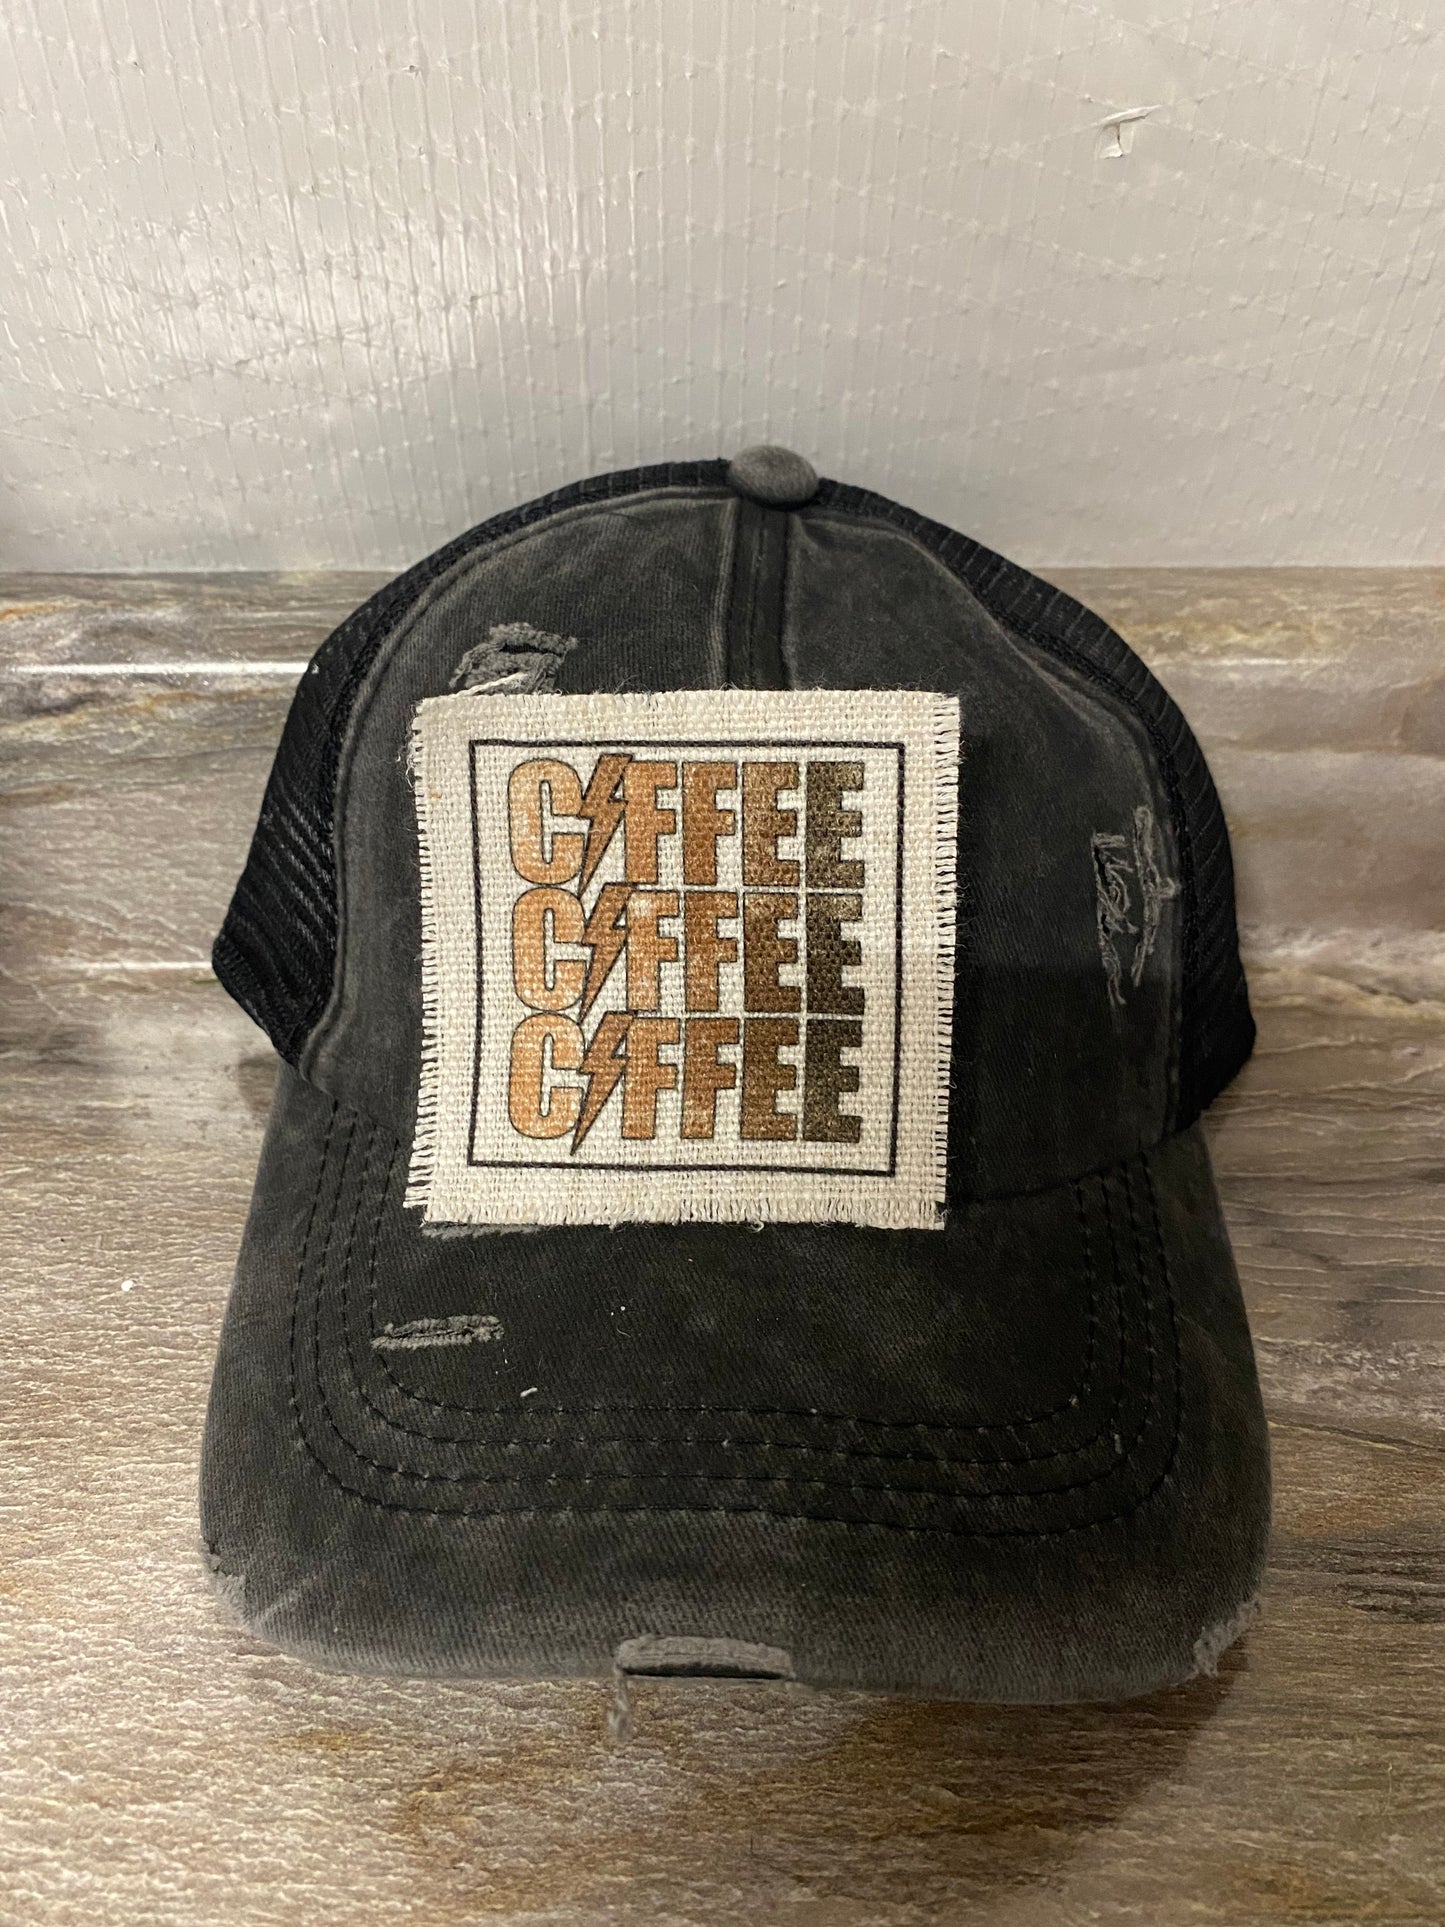 Coffee Repeat with Bolt Hat Patch